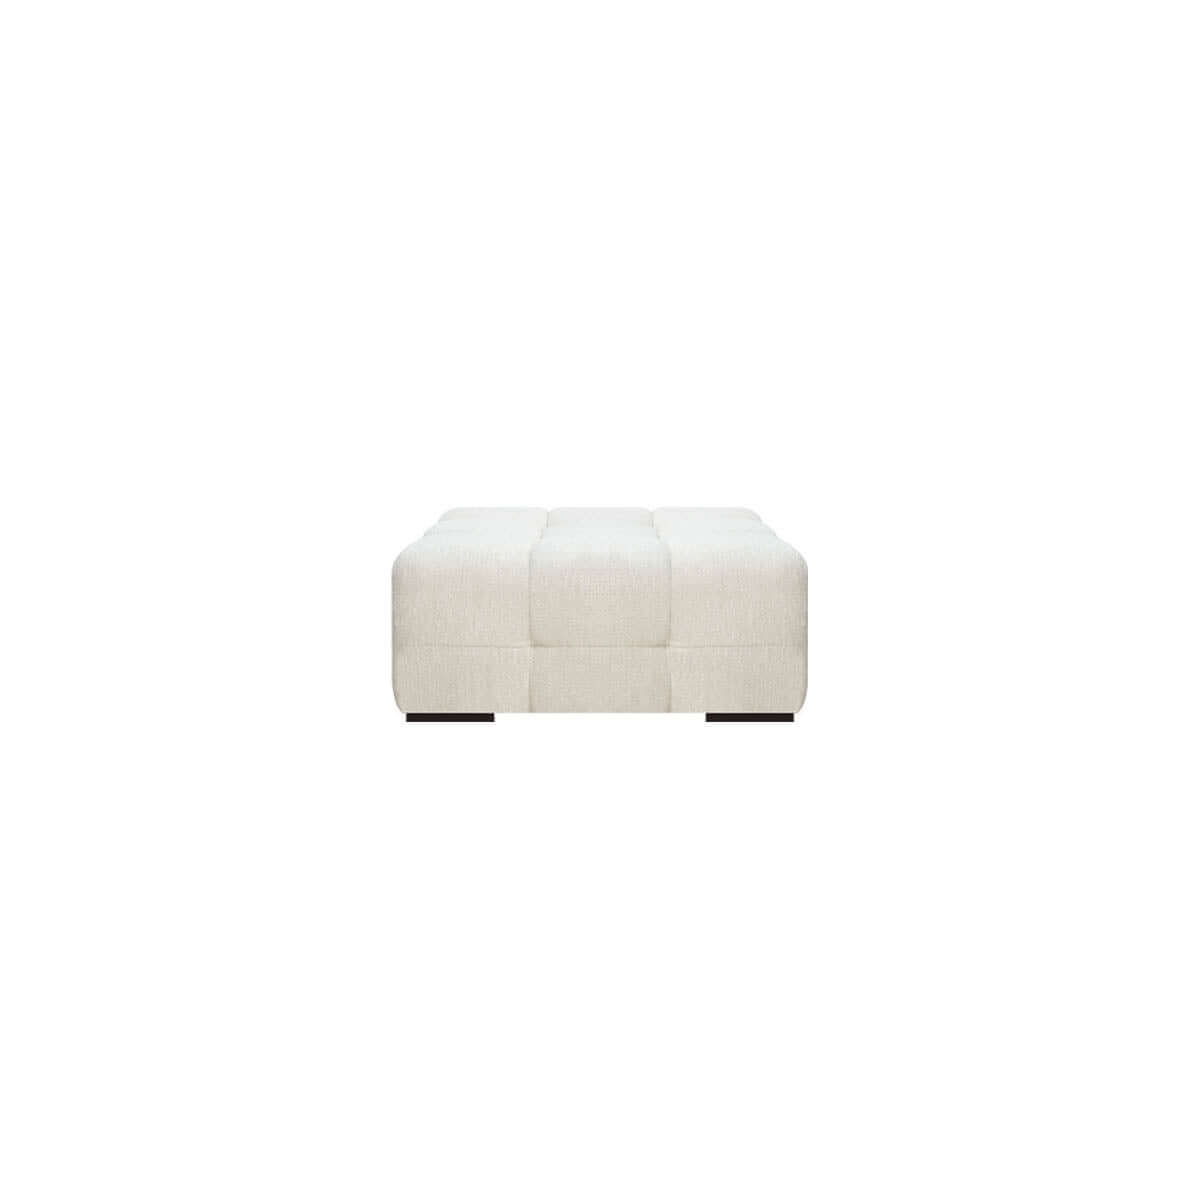 Aztec Ottoman simple with straight lines furniture di indonesia sofa